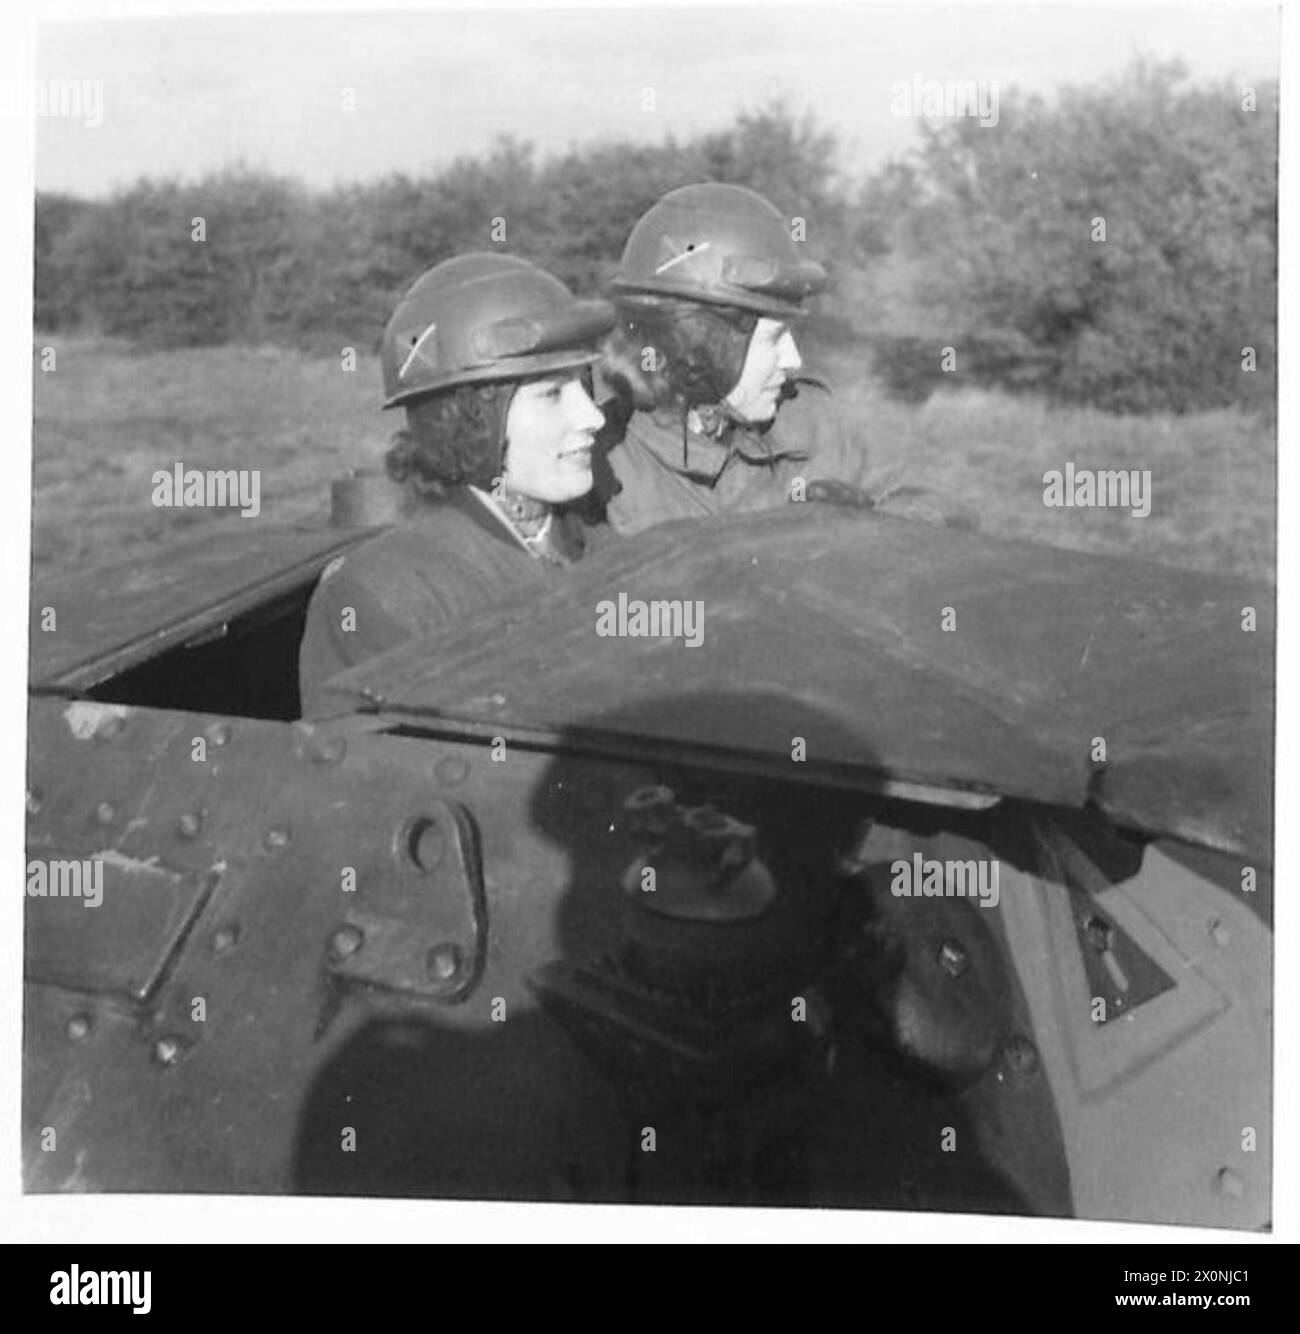 MUNITION GIRLS VISIT THE TANKS - Mrs. E. Tregear and Miss V. Braban go for a ride in one of the tanks. Photographic negative , British Army Stock Photo